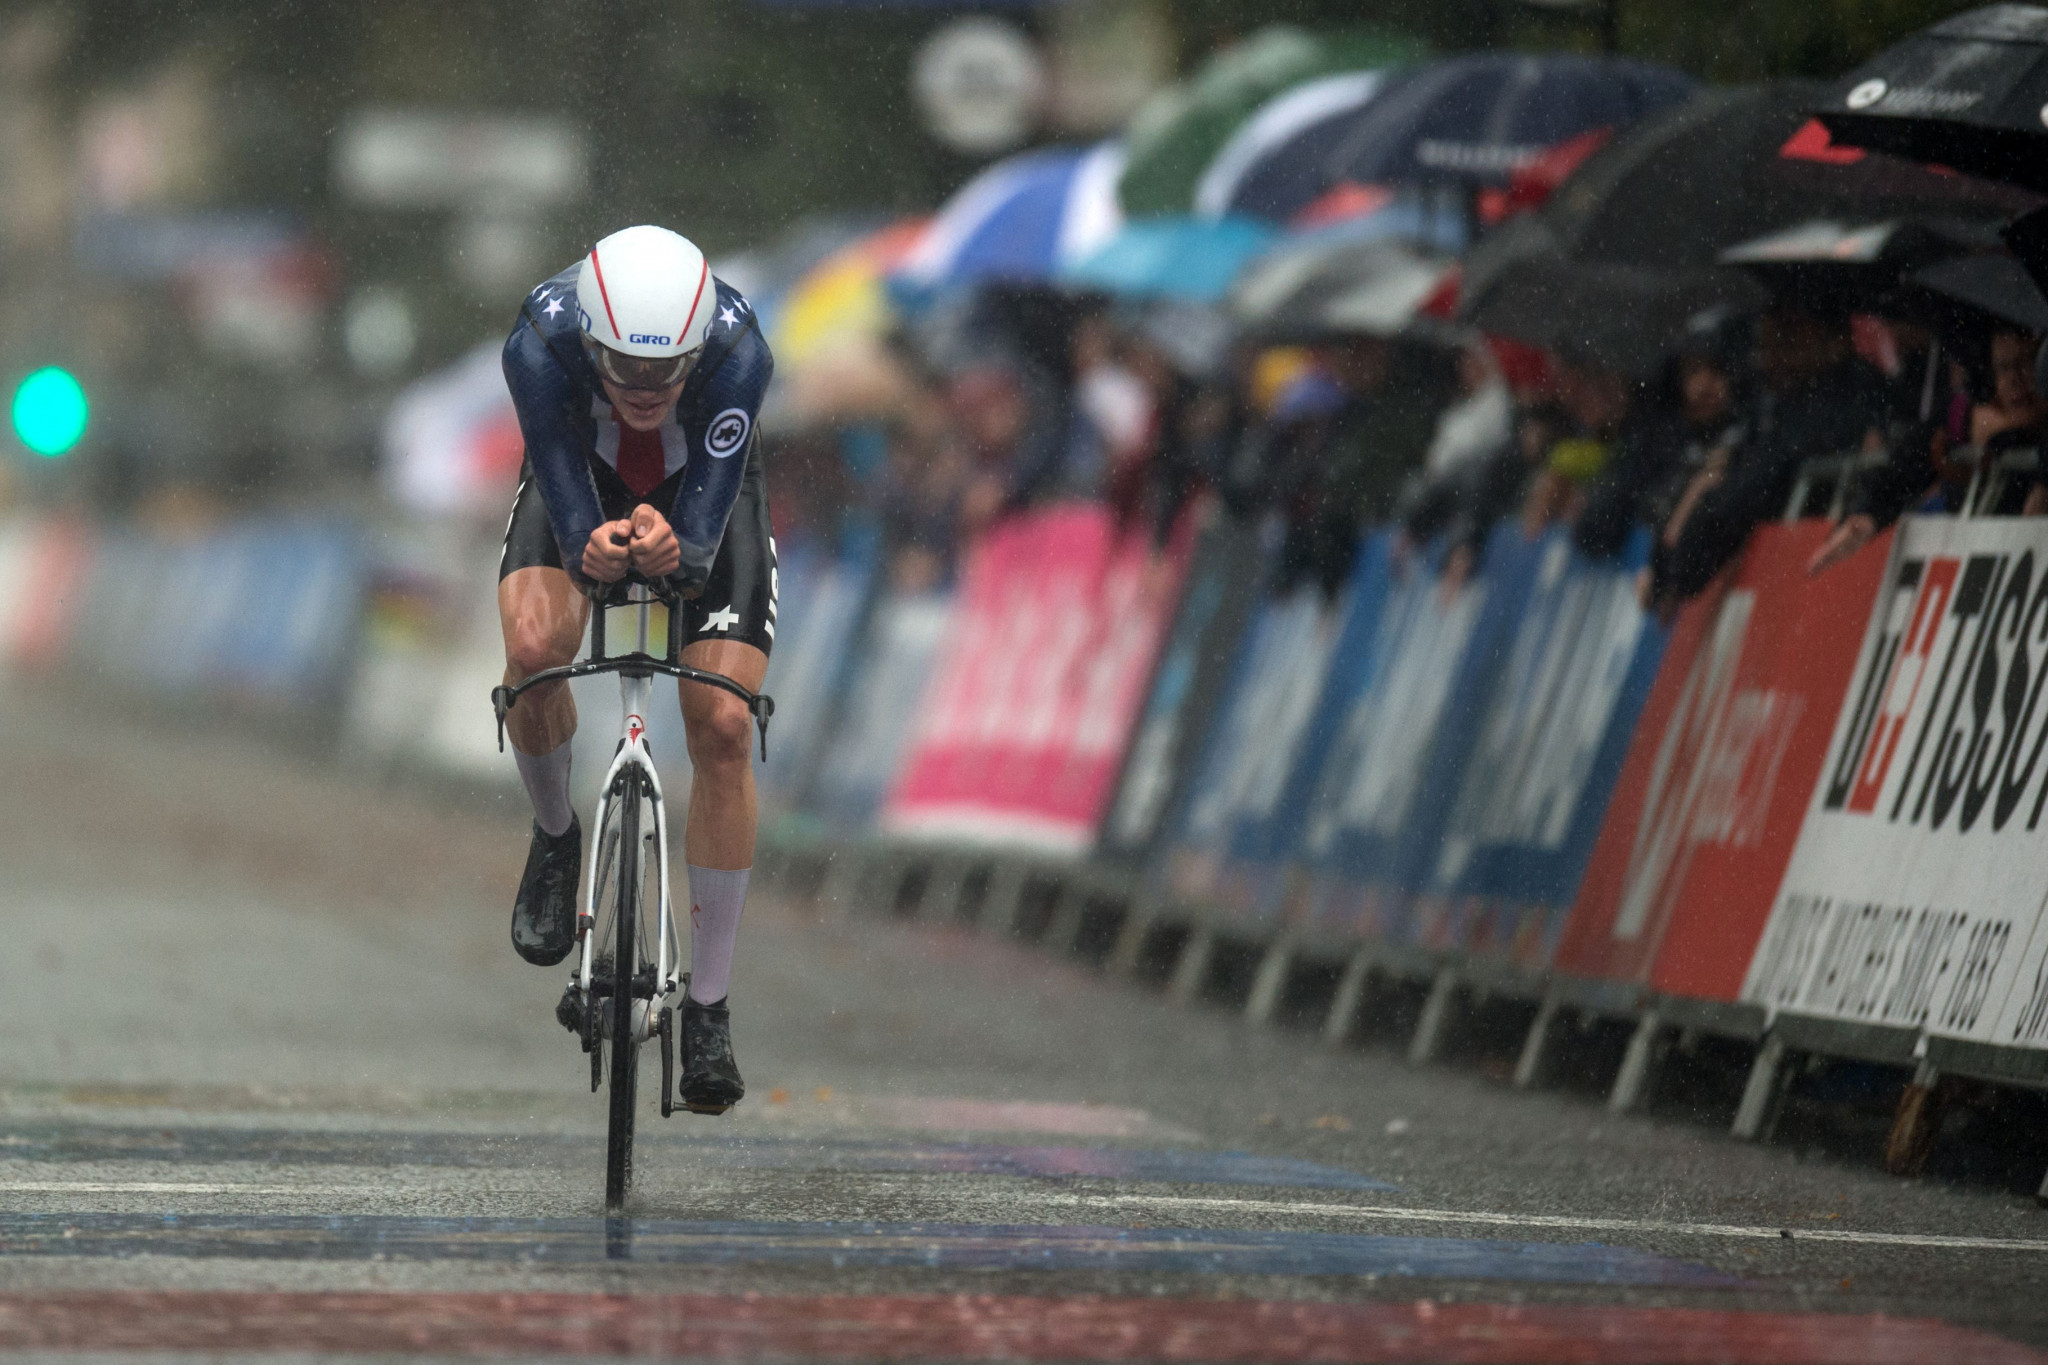 Conditions at the men's under-23 time trial at the 2019 UCI Road World Championships were particularly hazardous ©Getty Images